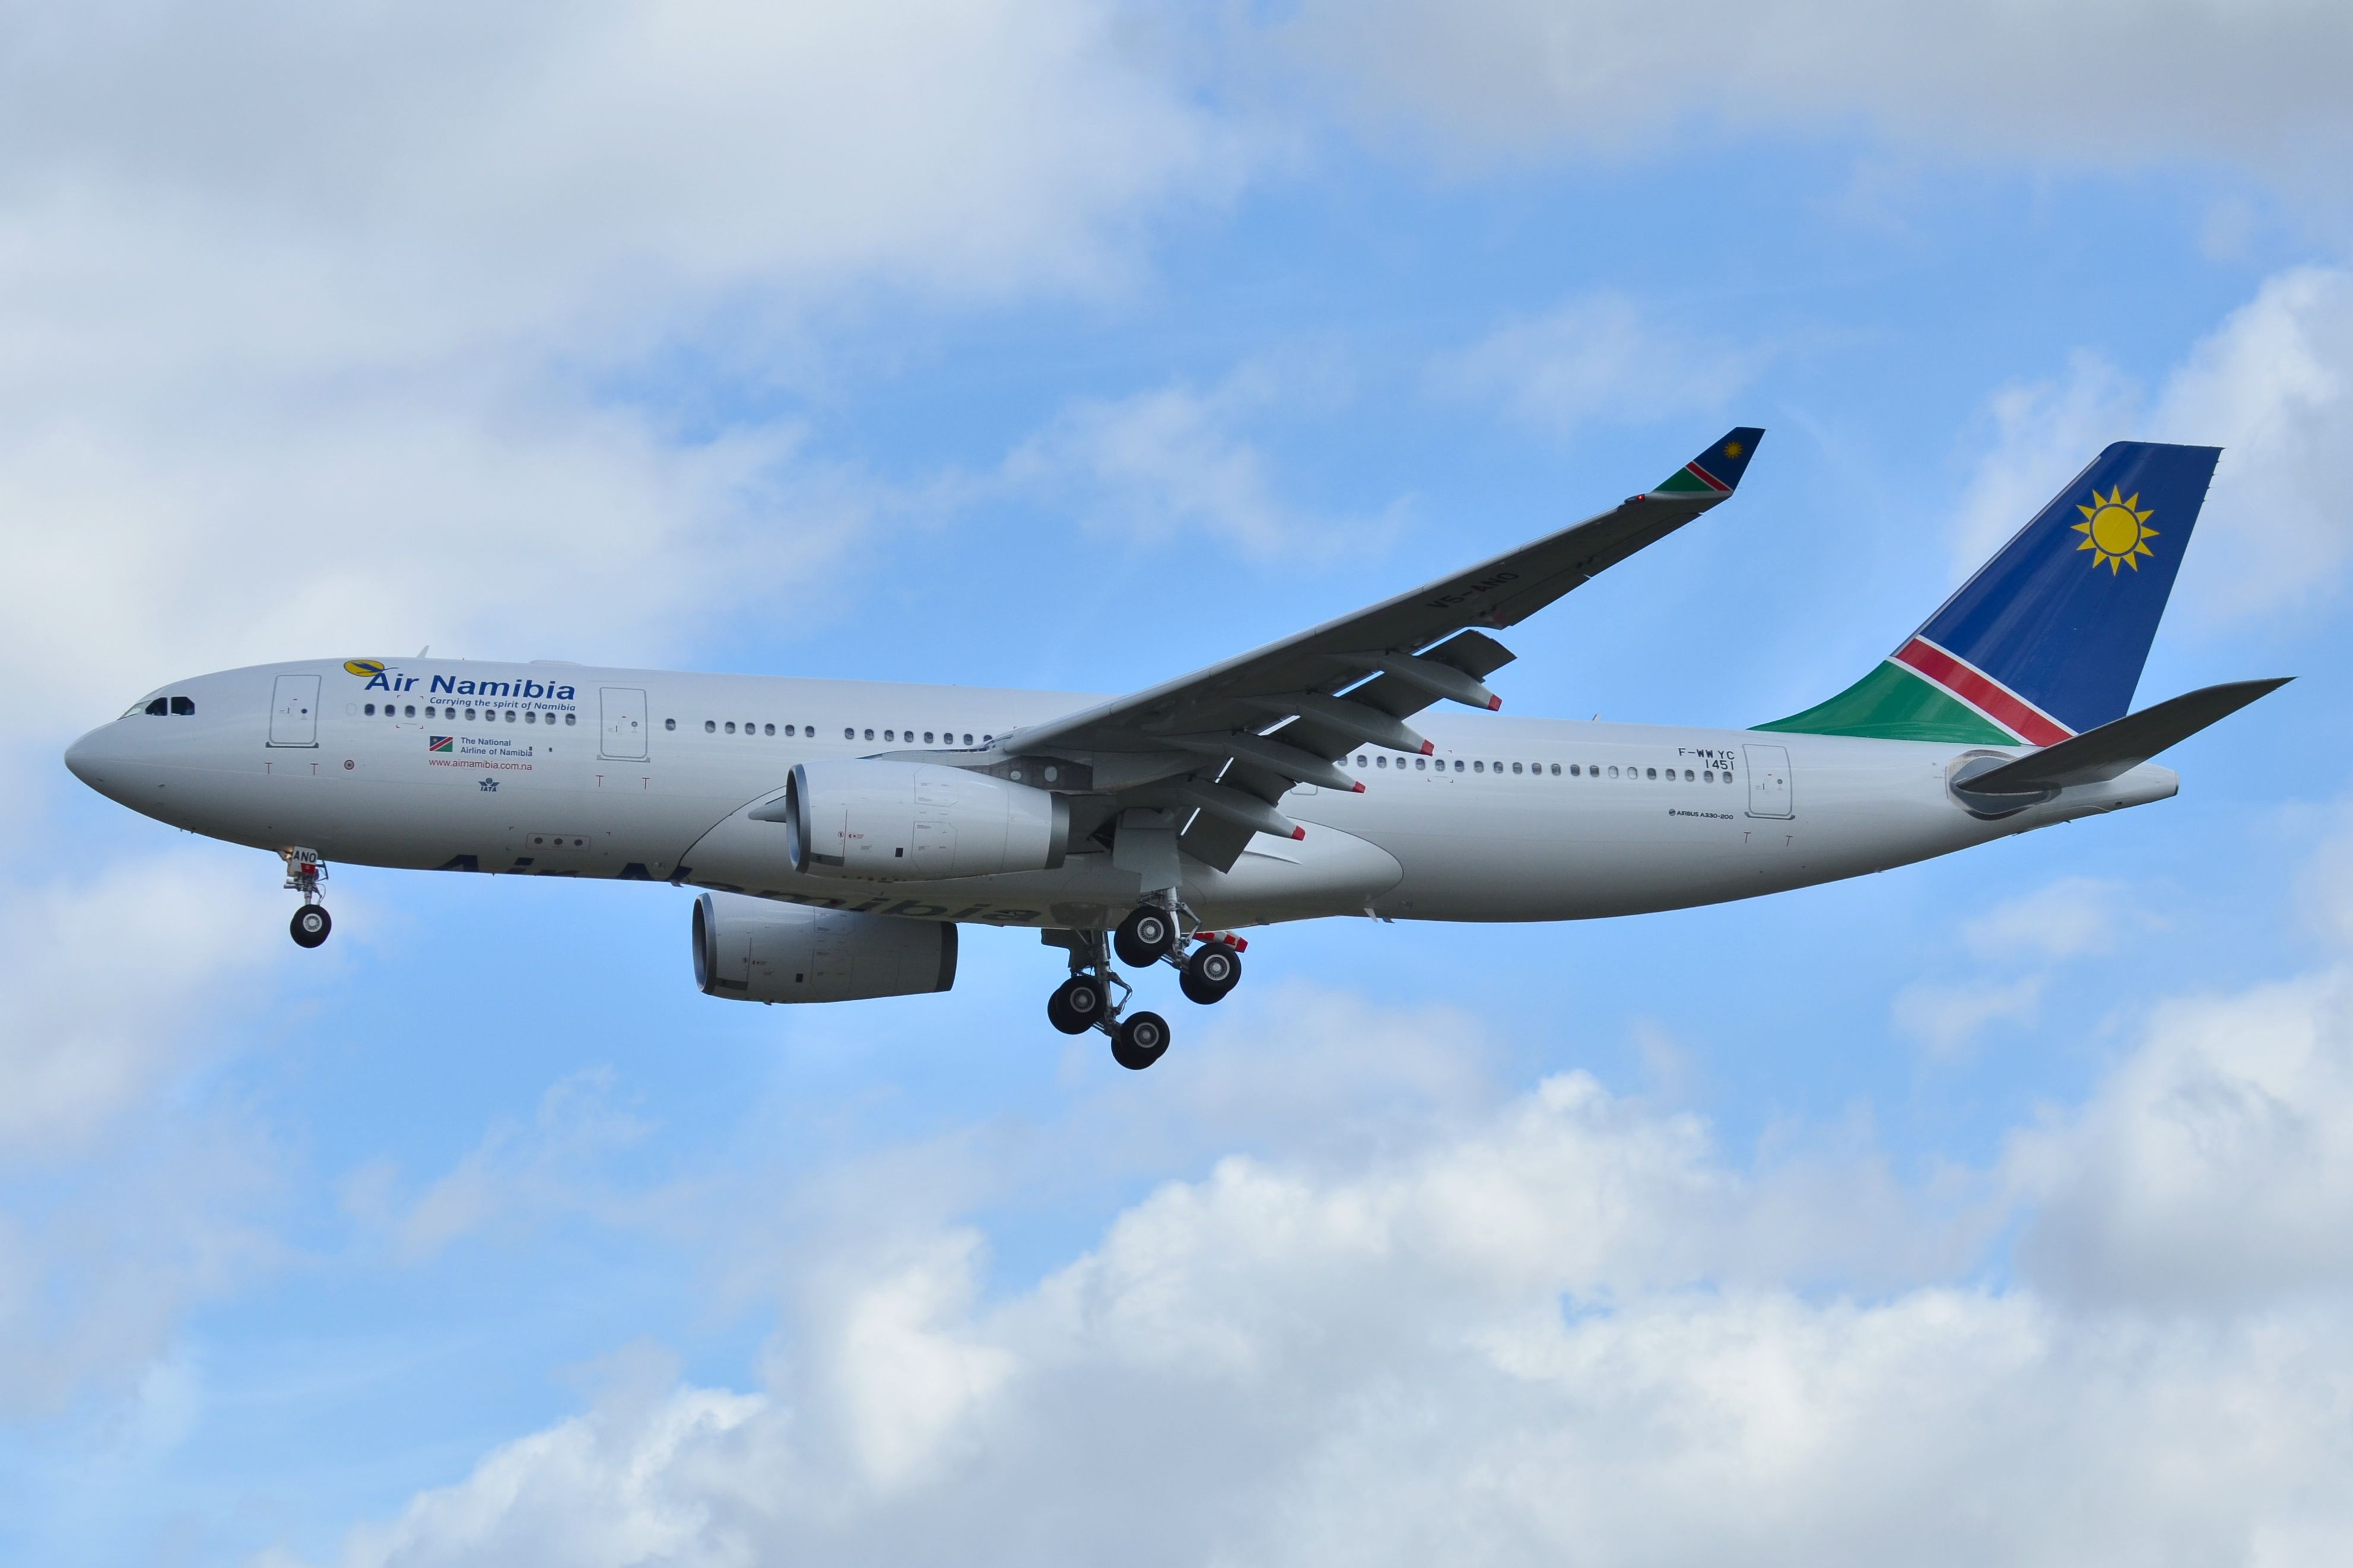 An Air Namibia Airbus A330-200 Flying in the sky.